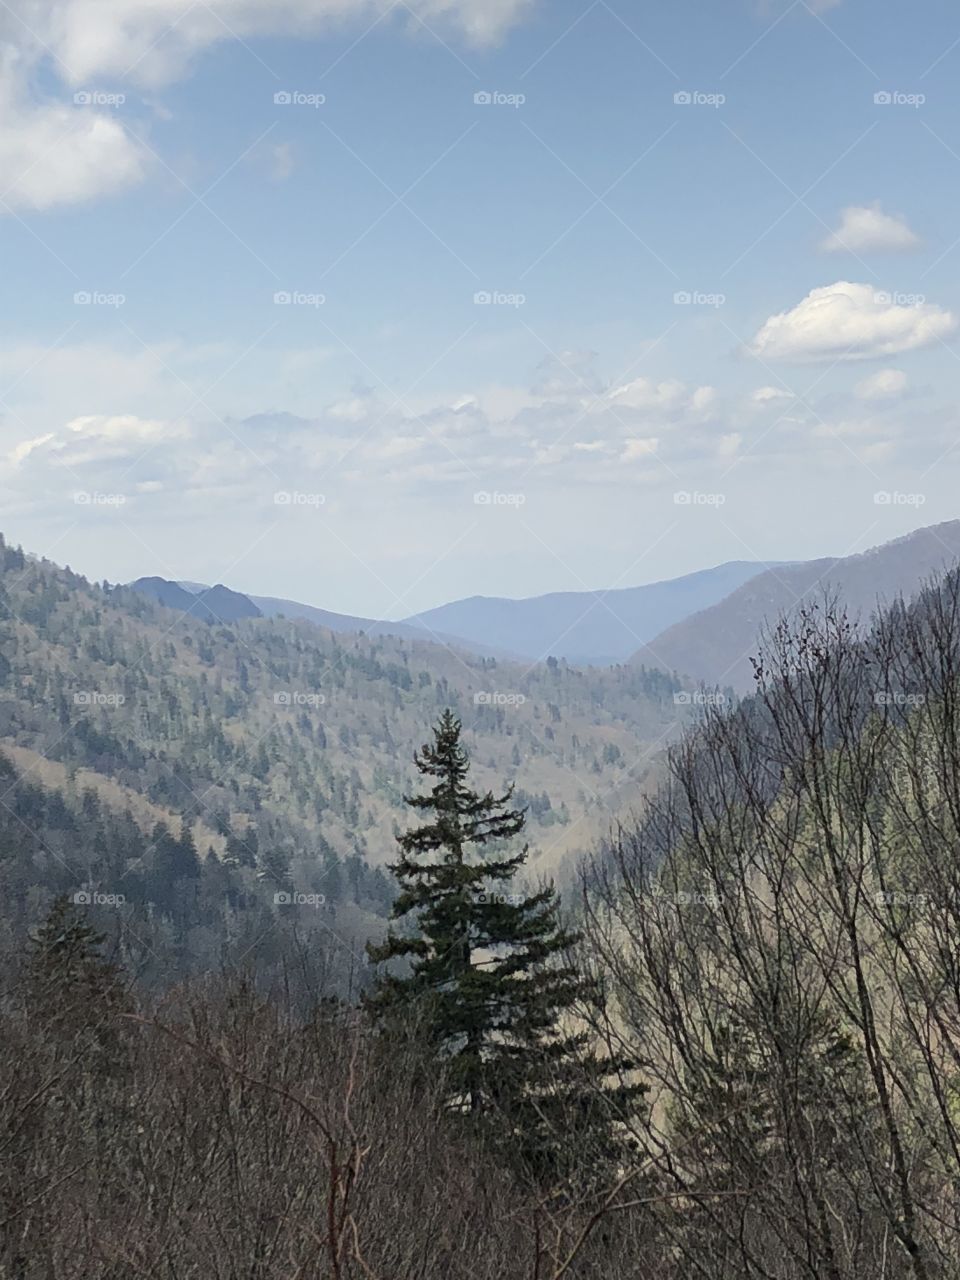 A pine looming in the foreground of the beautiful Smokey Mountains. 